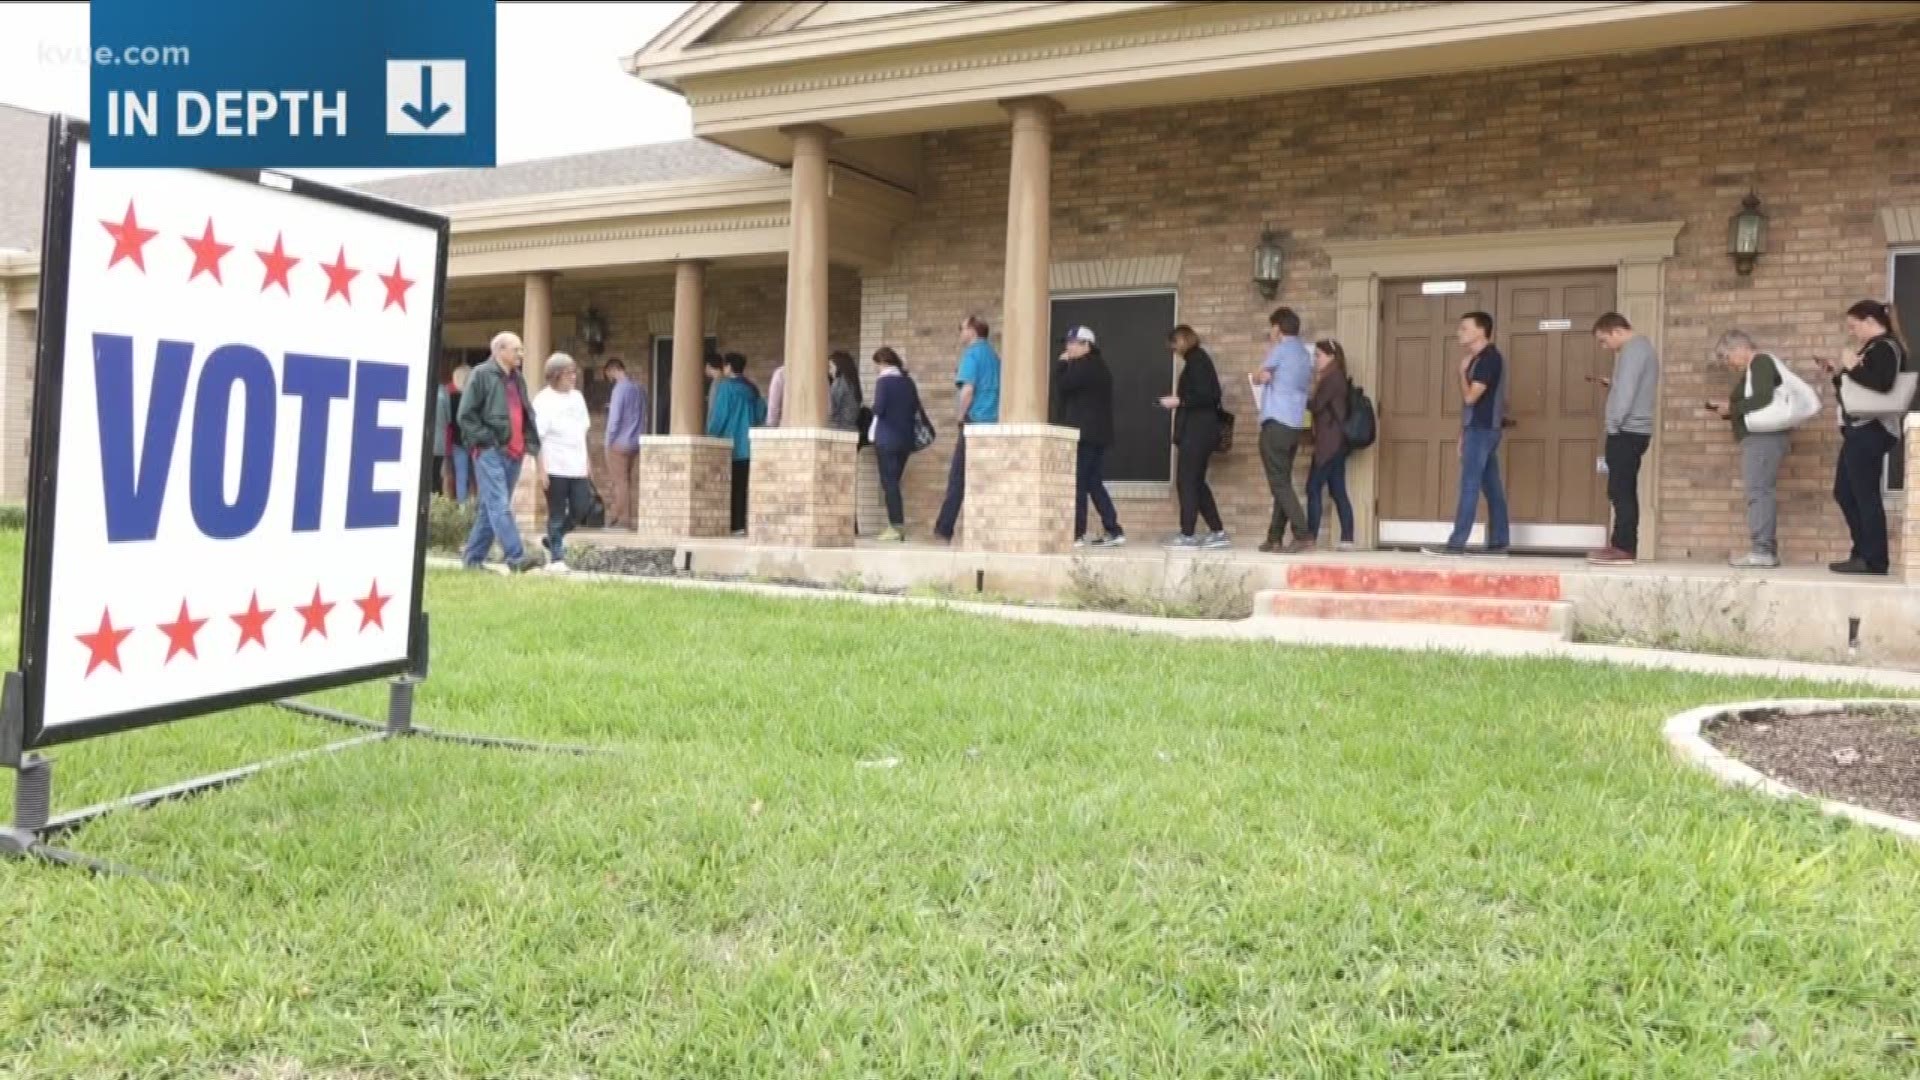 More than 7,000 voters cast their ballots in Travis County on the first day of early voting.